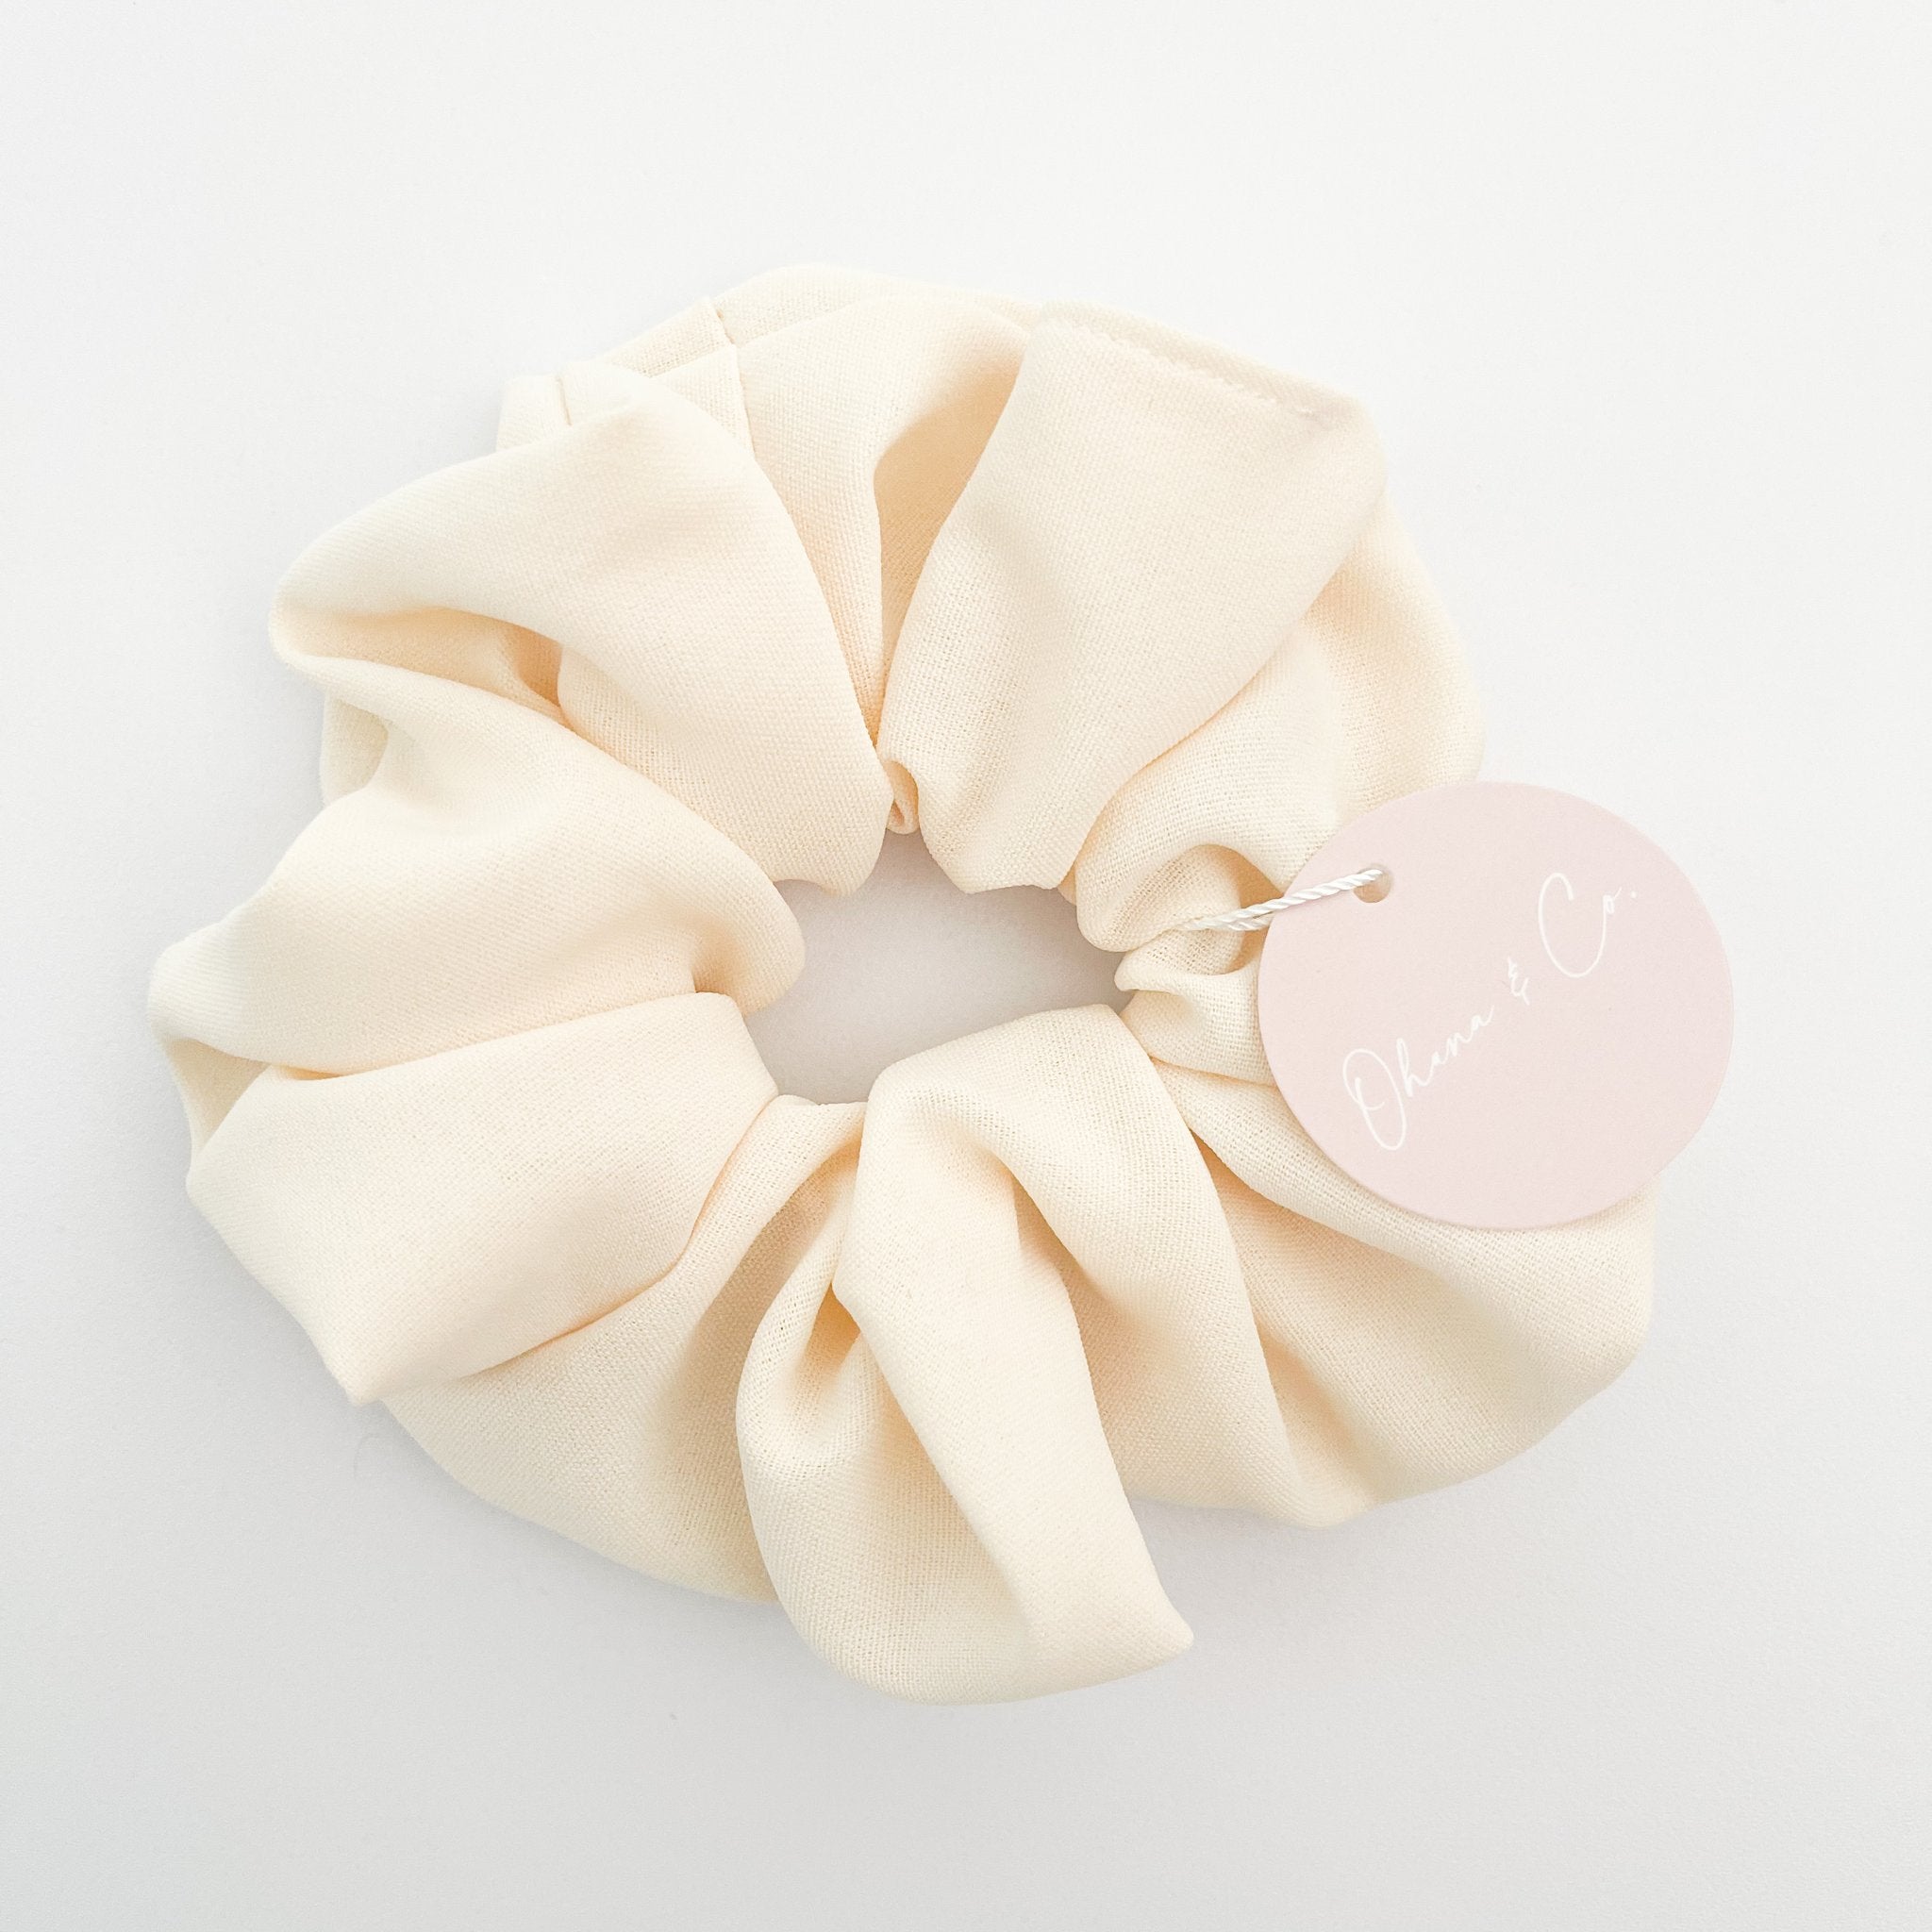 hand made classic cream scrunchie gifts for her from little gift project